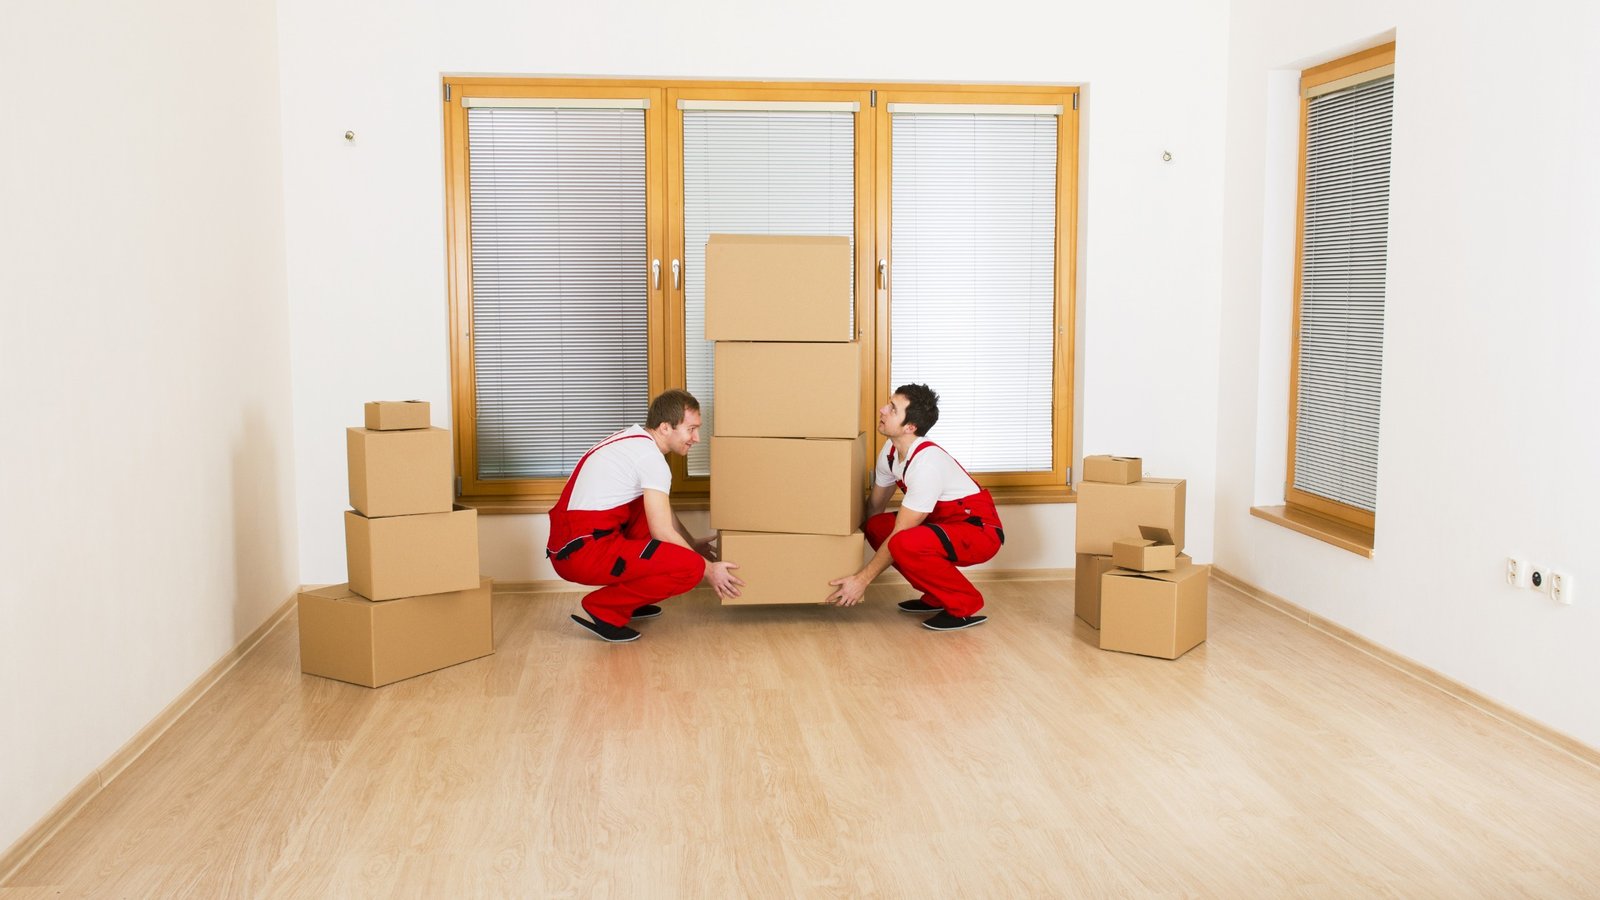 Here are a few tips to protect your belongings during a move